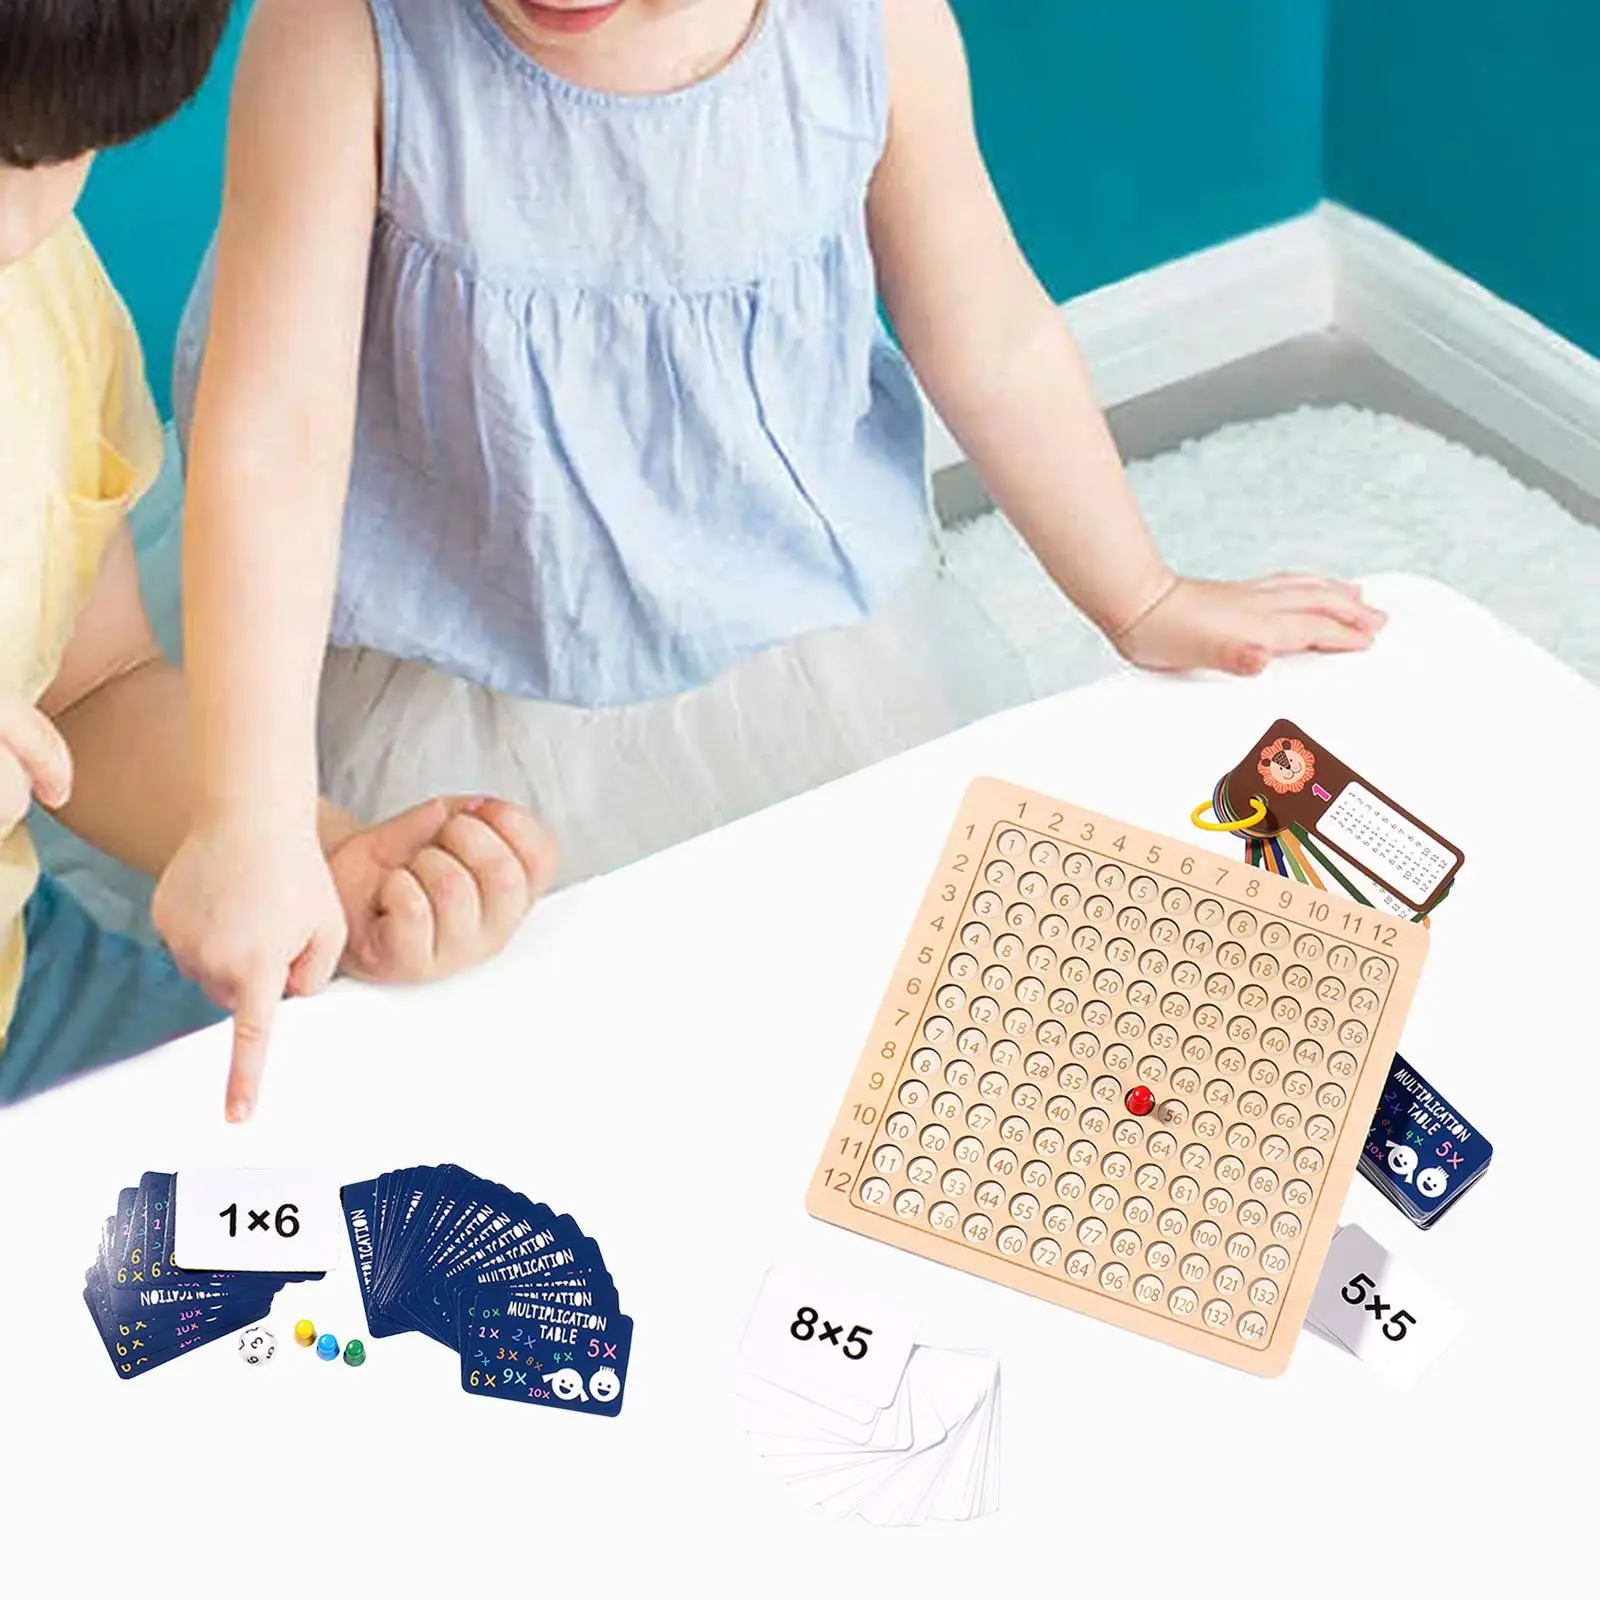 Multiplication Table Board Multiplication Division Board for Kids Gifts